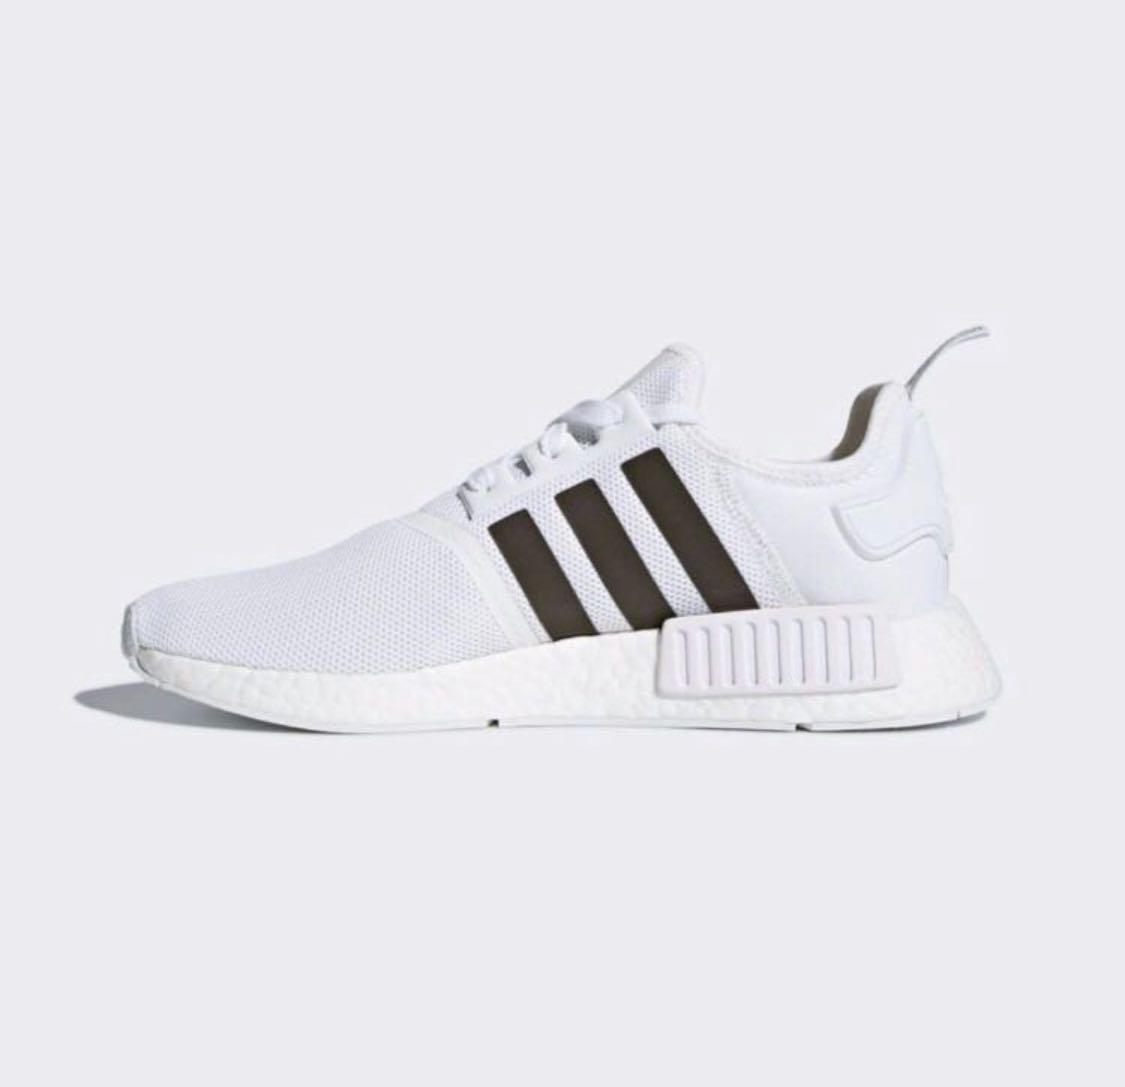 adidas NMD R1 white trace grey stripes, Fashion, Footwear, Sneakers on Carousell